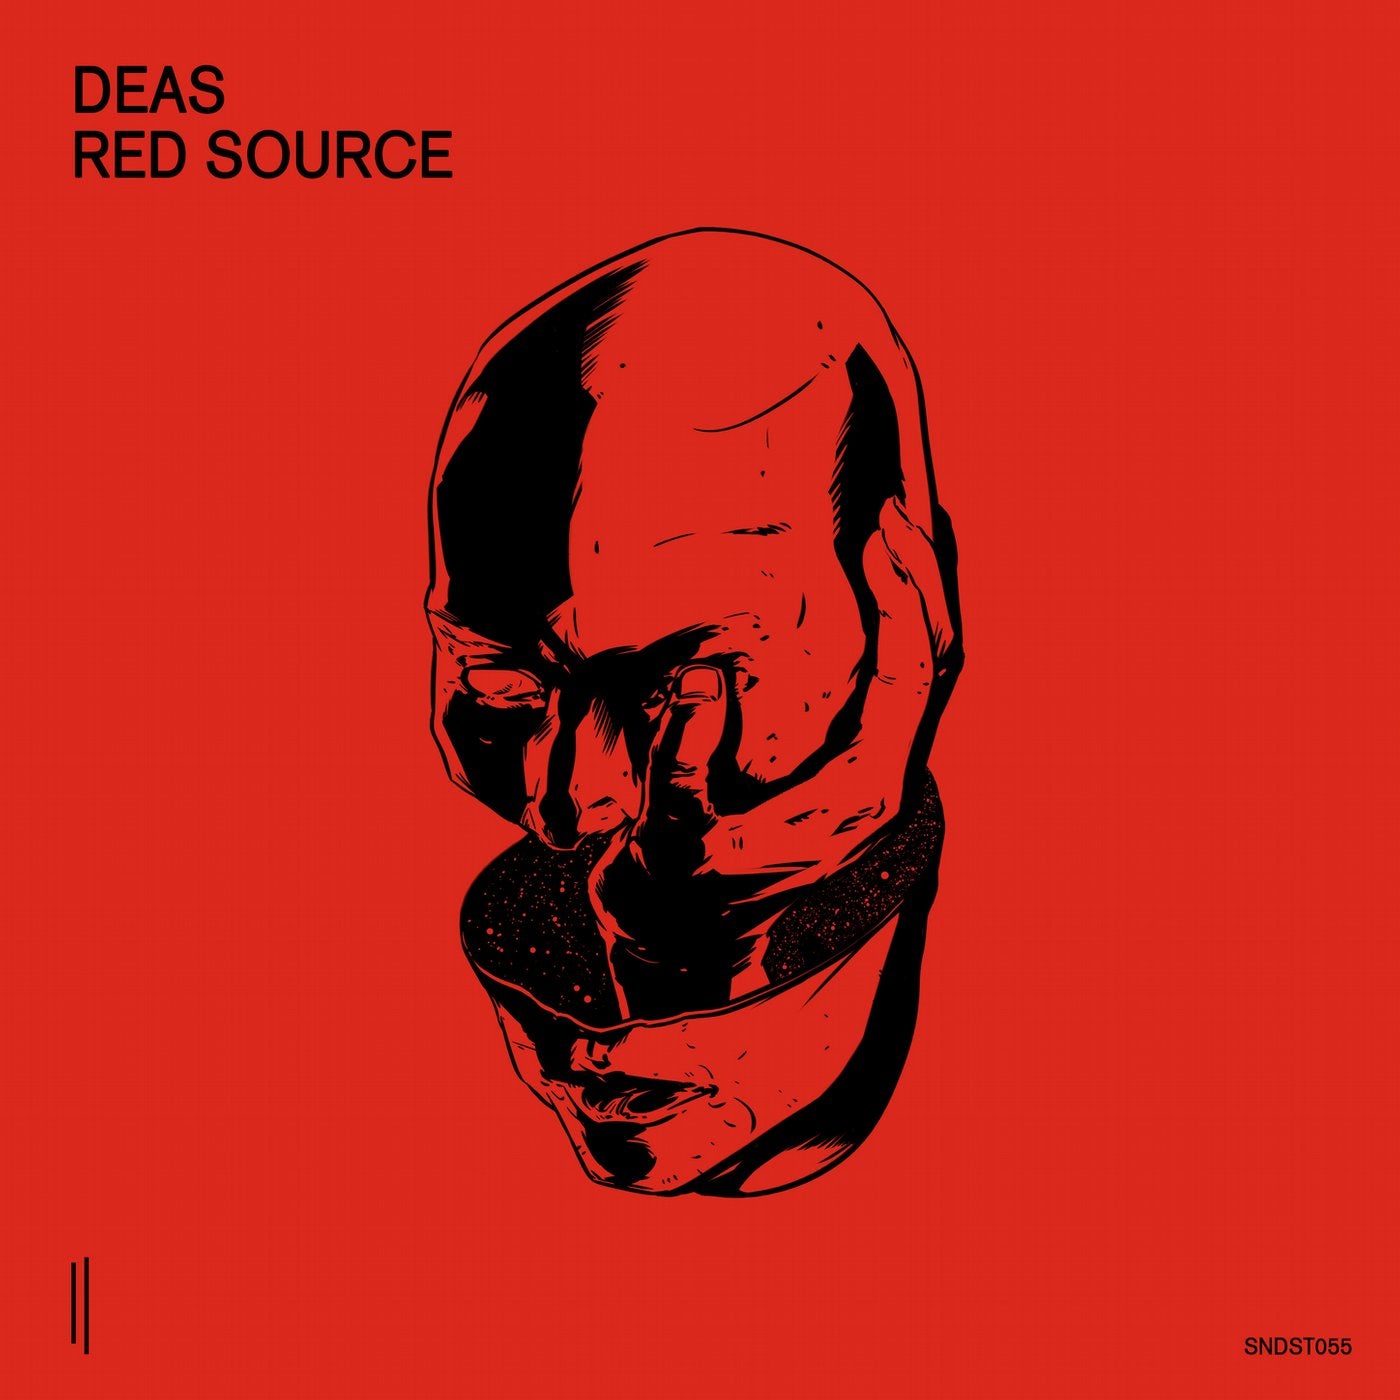 Red Source